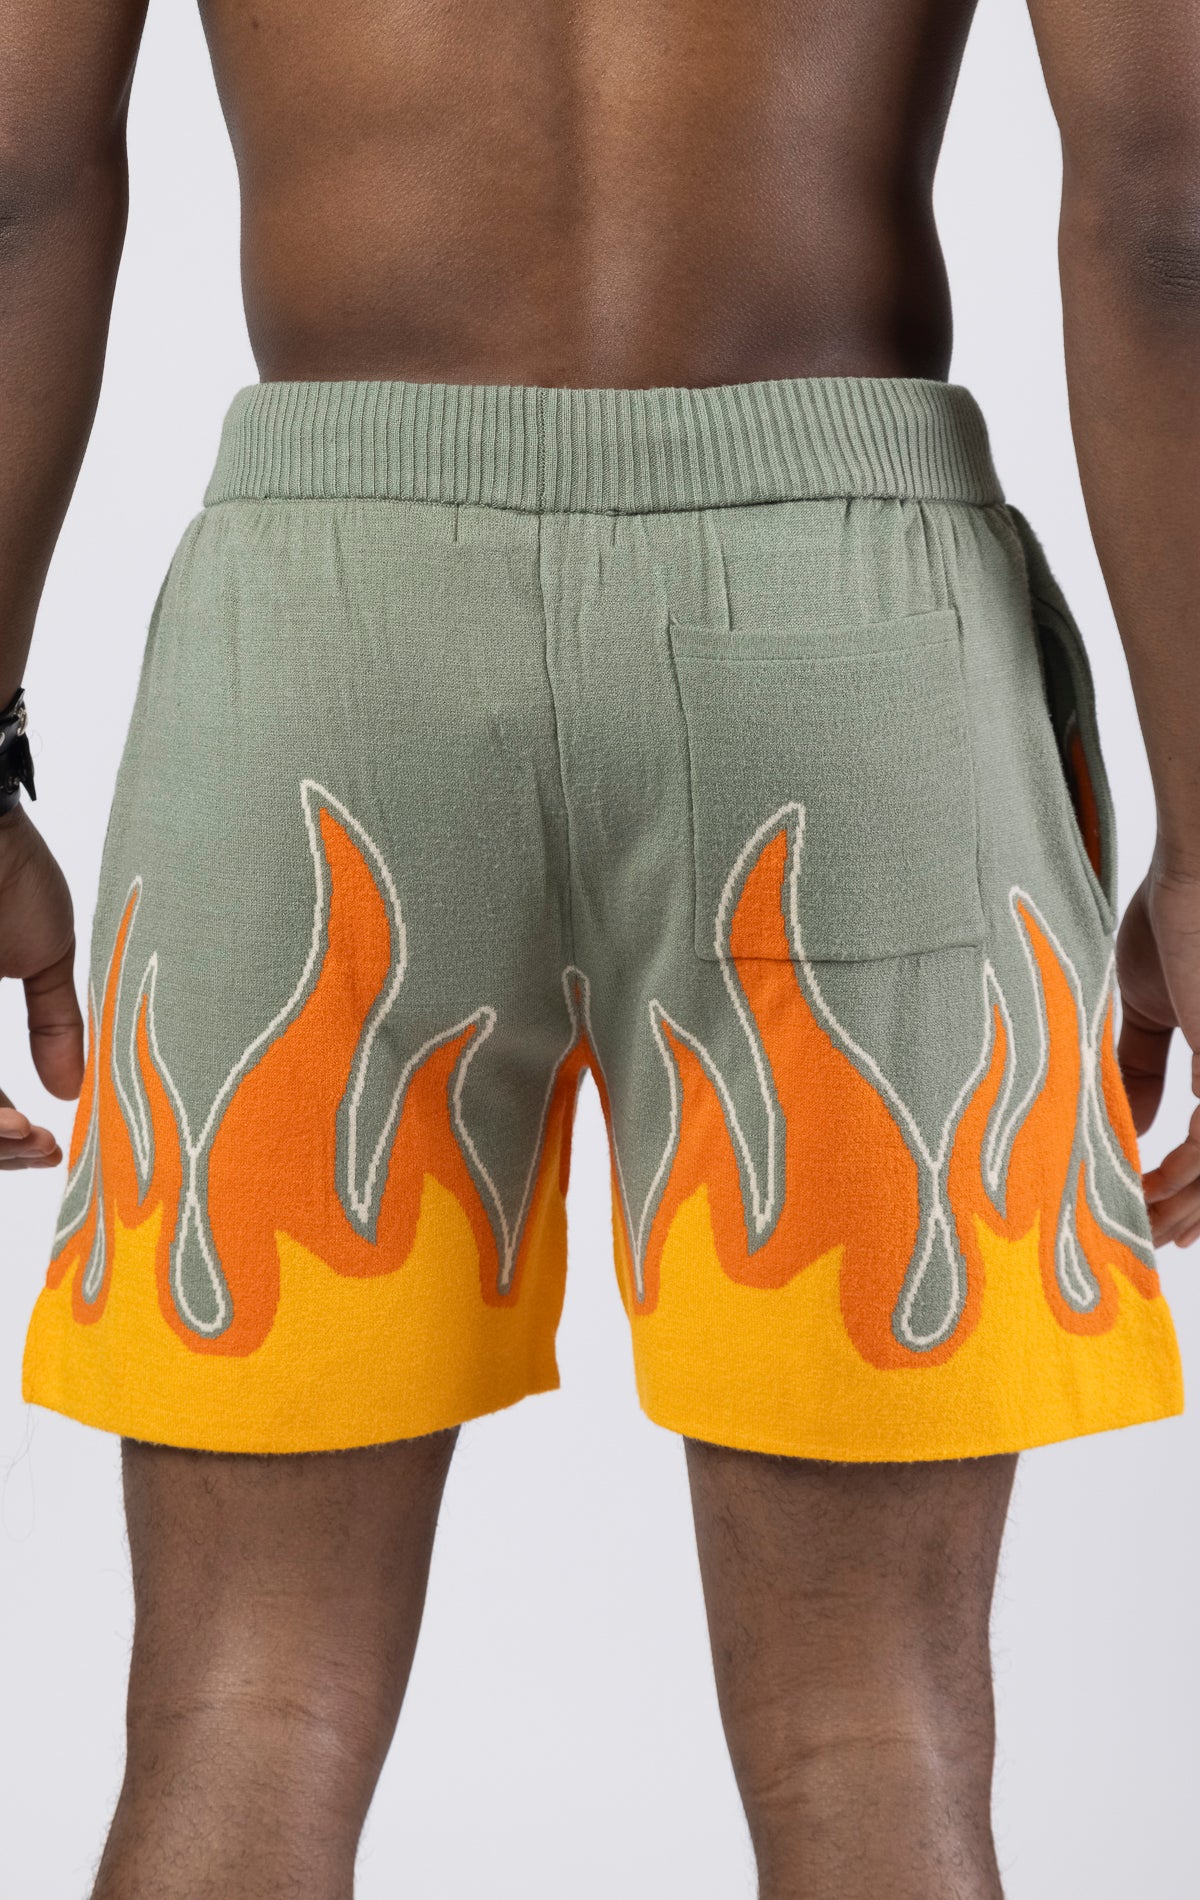 Sprayground Flame Sweater Shorts in sage green. Made from a soft and comfortable sweater material, these shorts feature a bold flame design on the bottom.